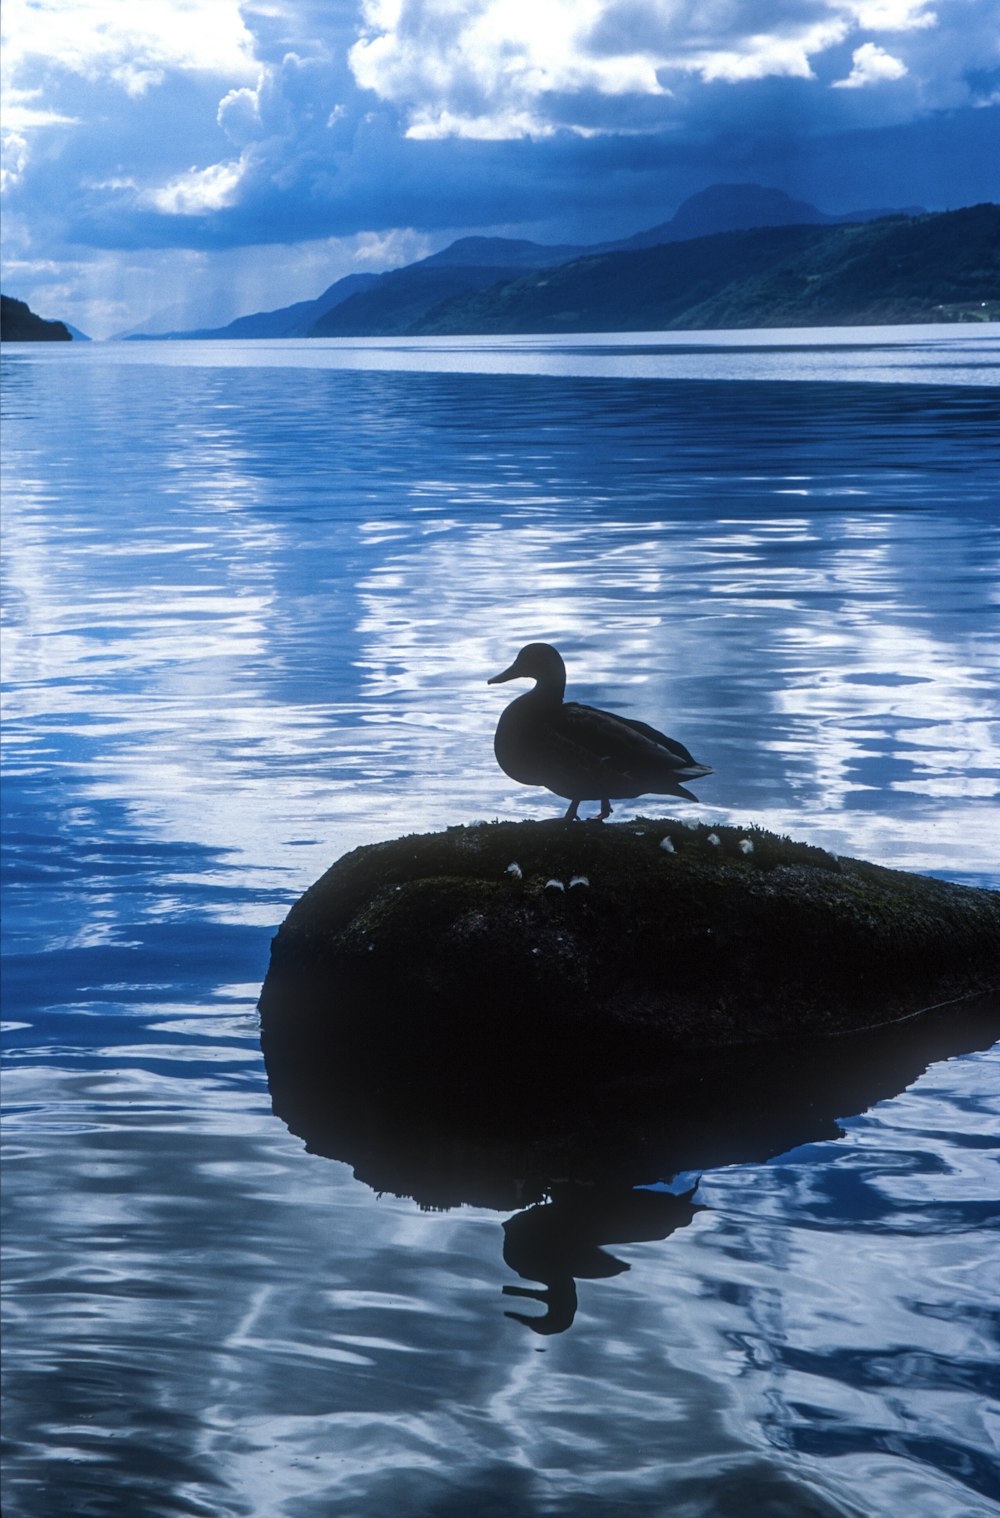 a bird is sitting on a rock in the water